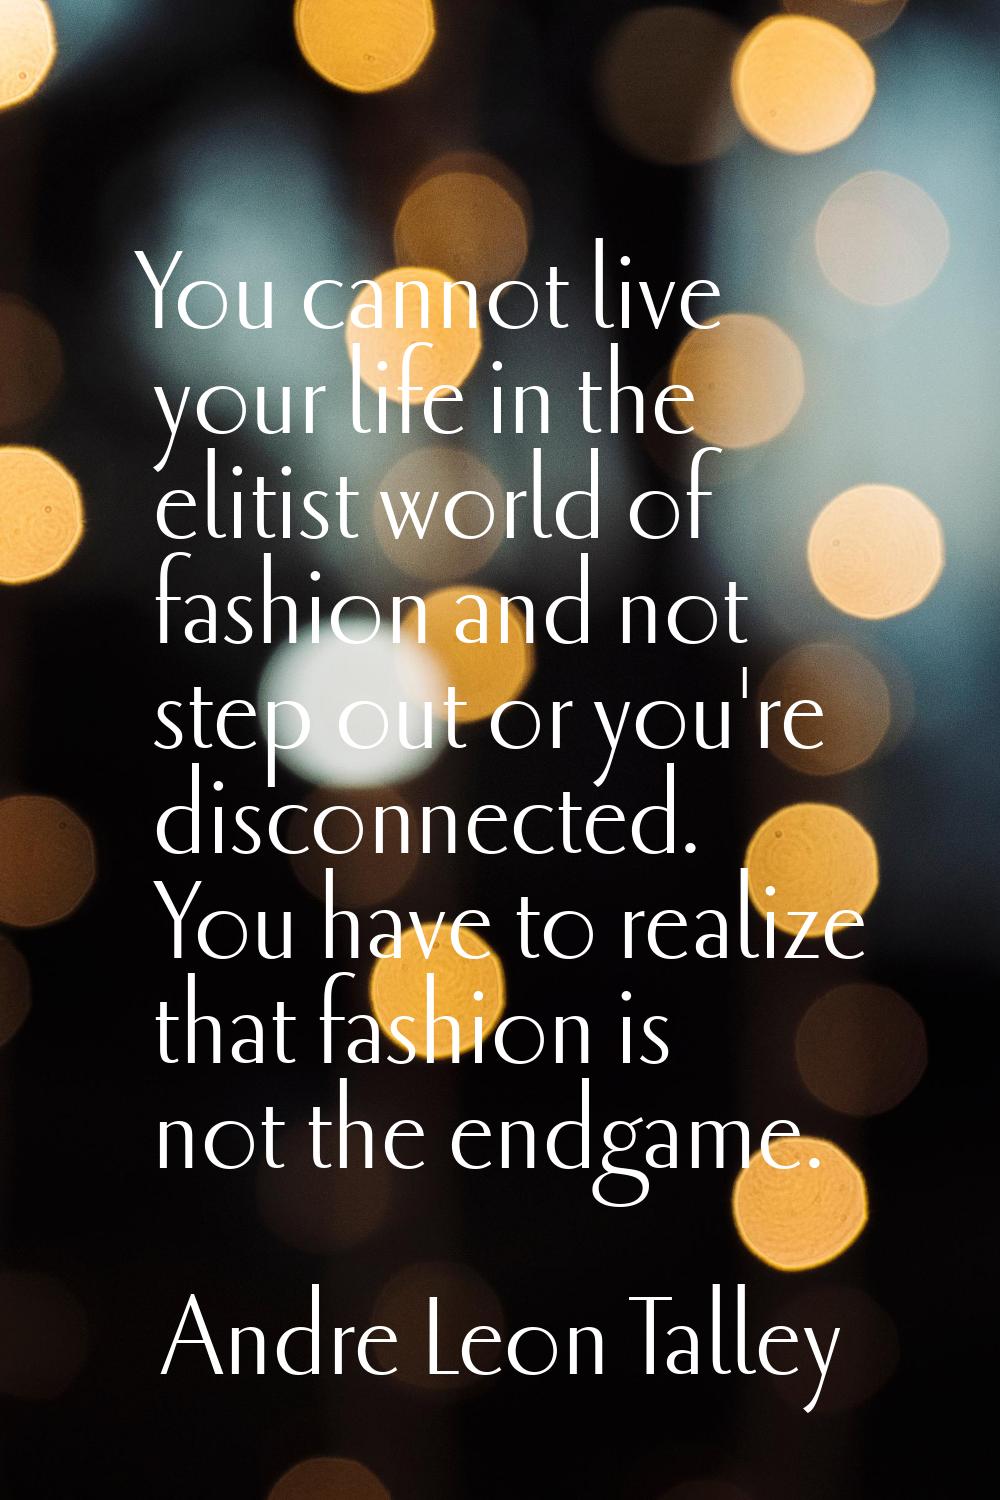 You cannot live your life in the elitist world of fashion and not step out or you're disconnected. 